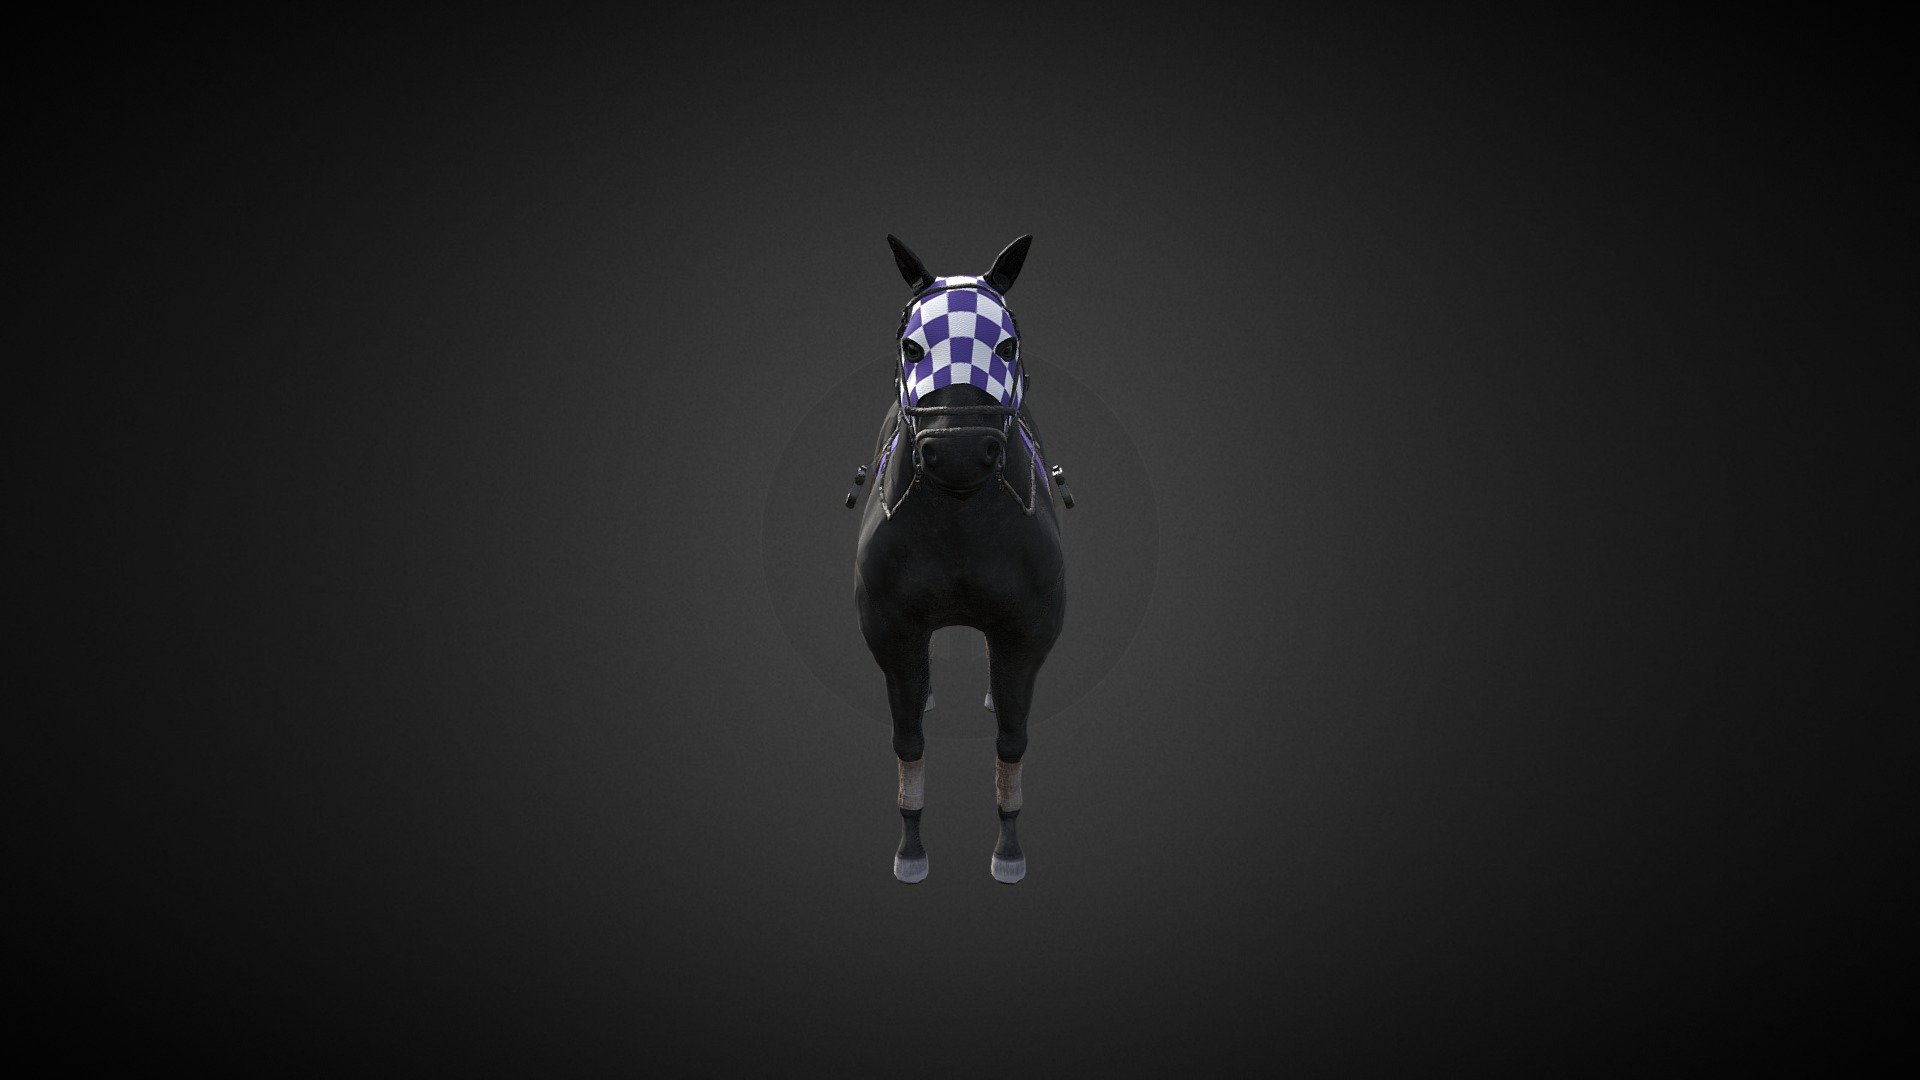 Black Racing Horse lowpoly. best for games and VR scene. All textures are PBR 4K resolutions. There are 3 material sets 1 For Body 1 For Eyes and 1 for All props combined 3d model